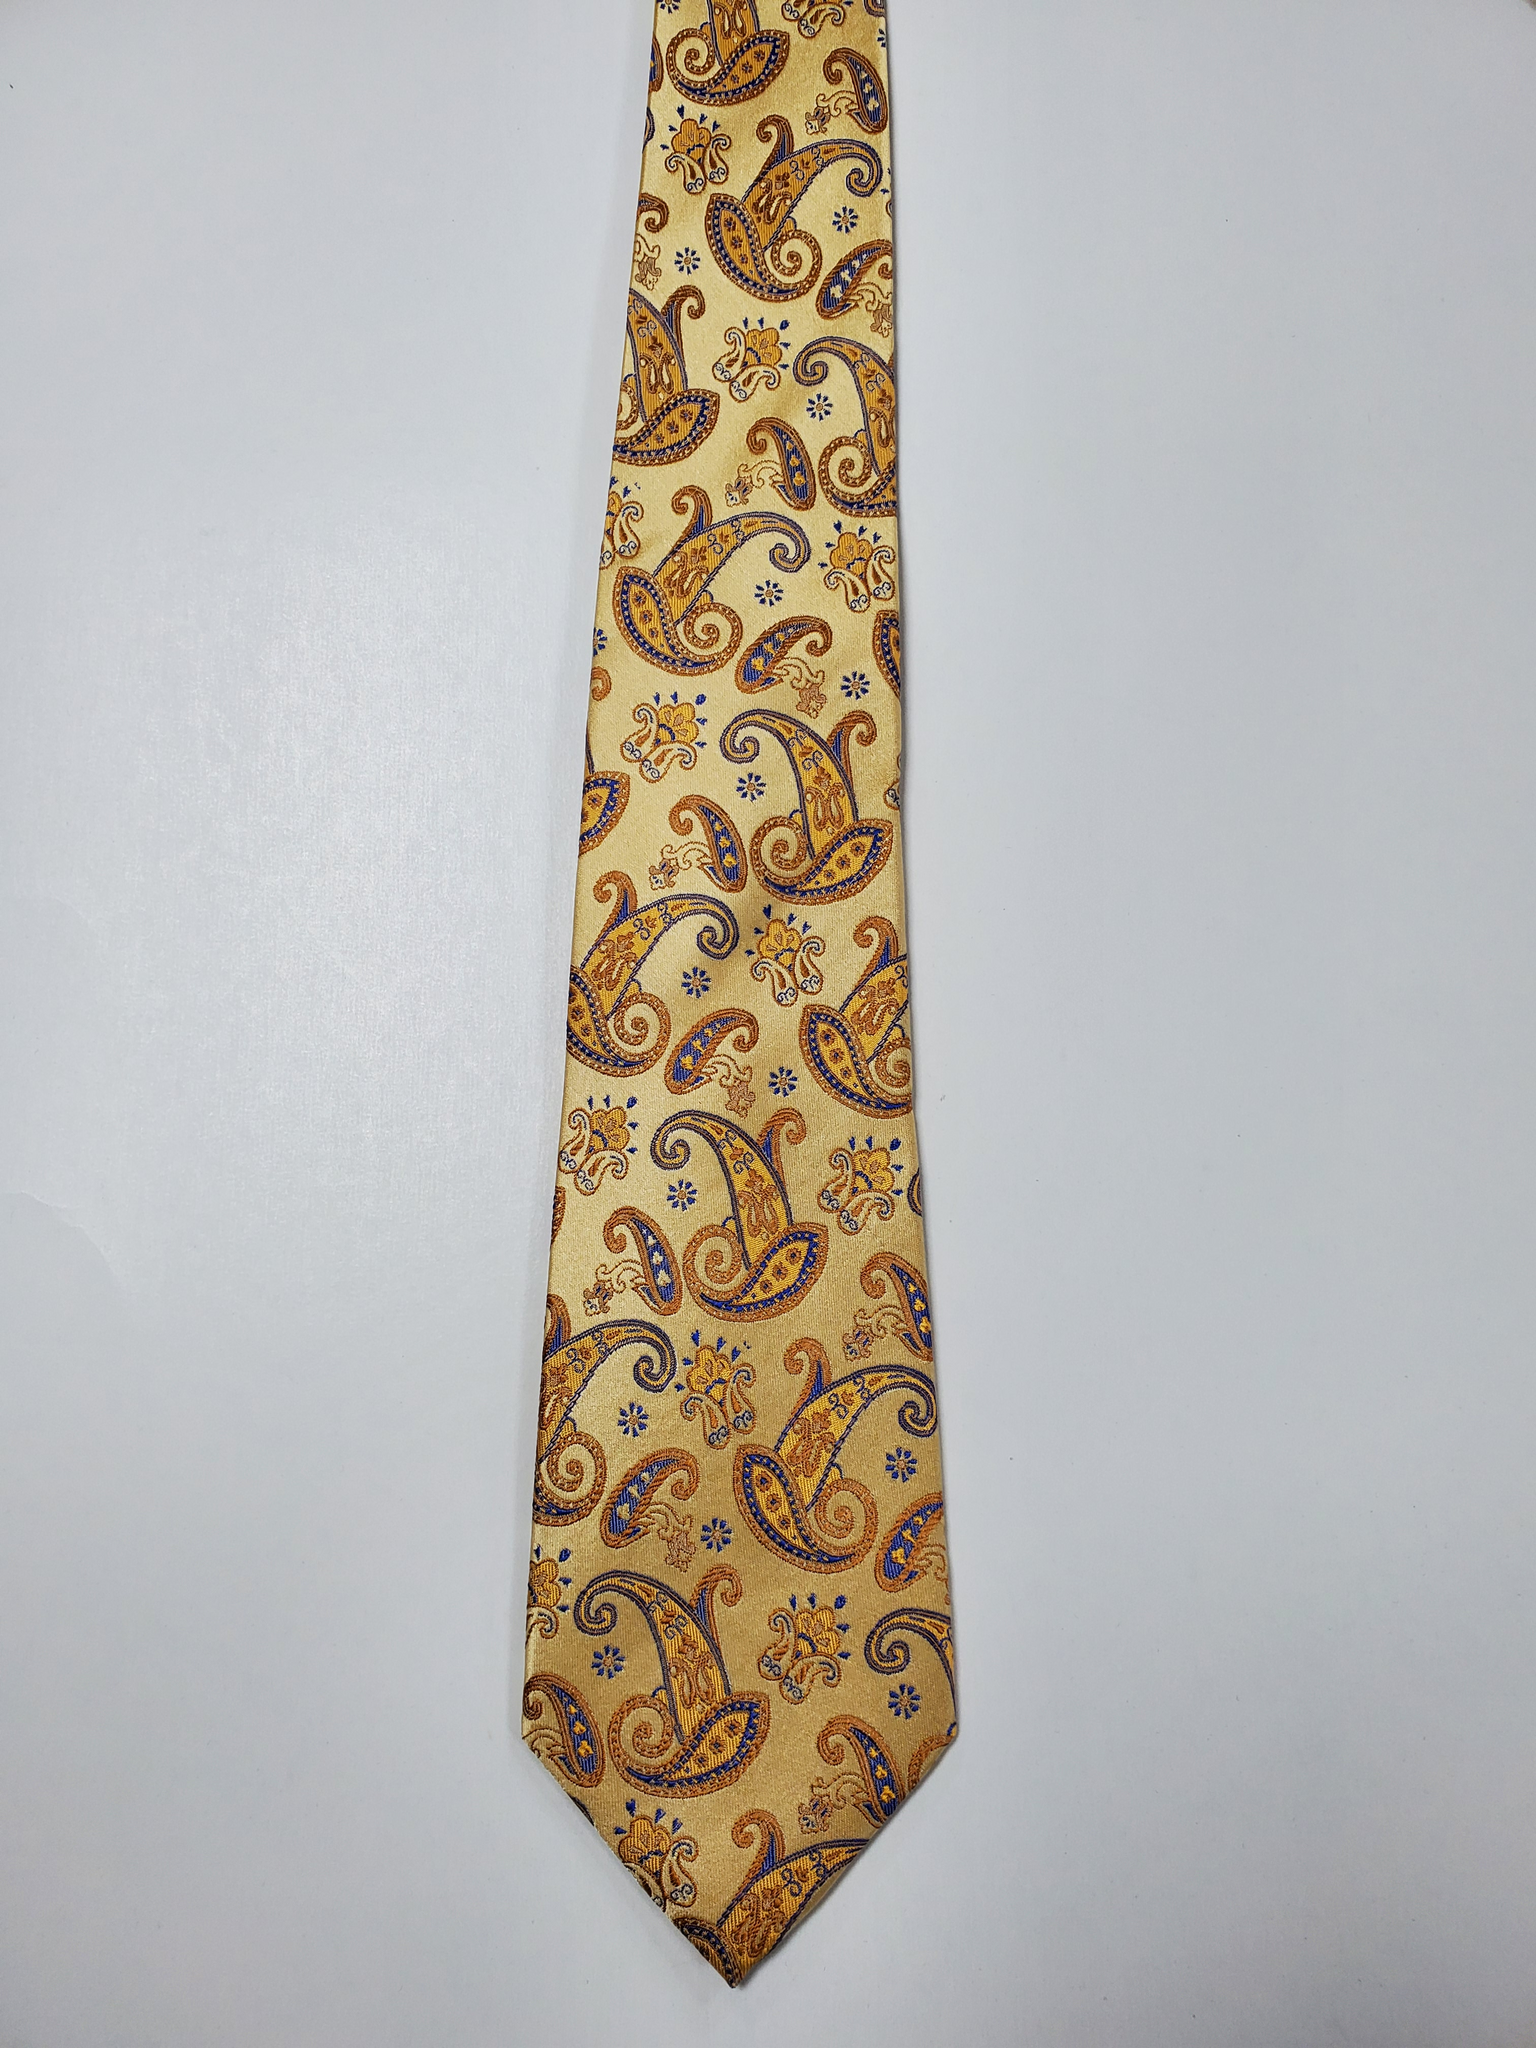 7-Fold Gold and Blue Paisley Silk Tie